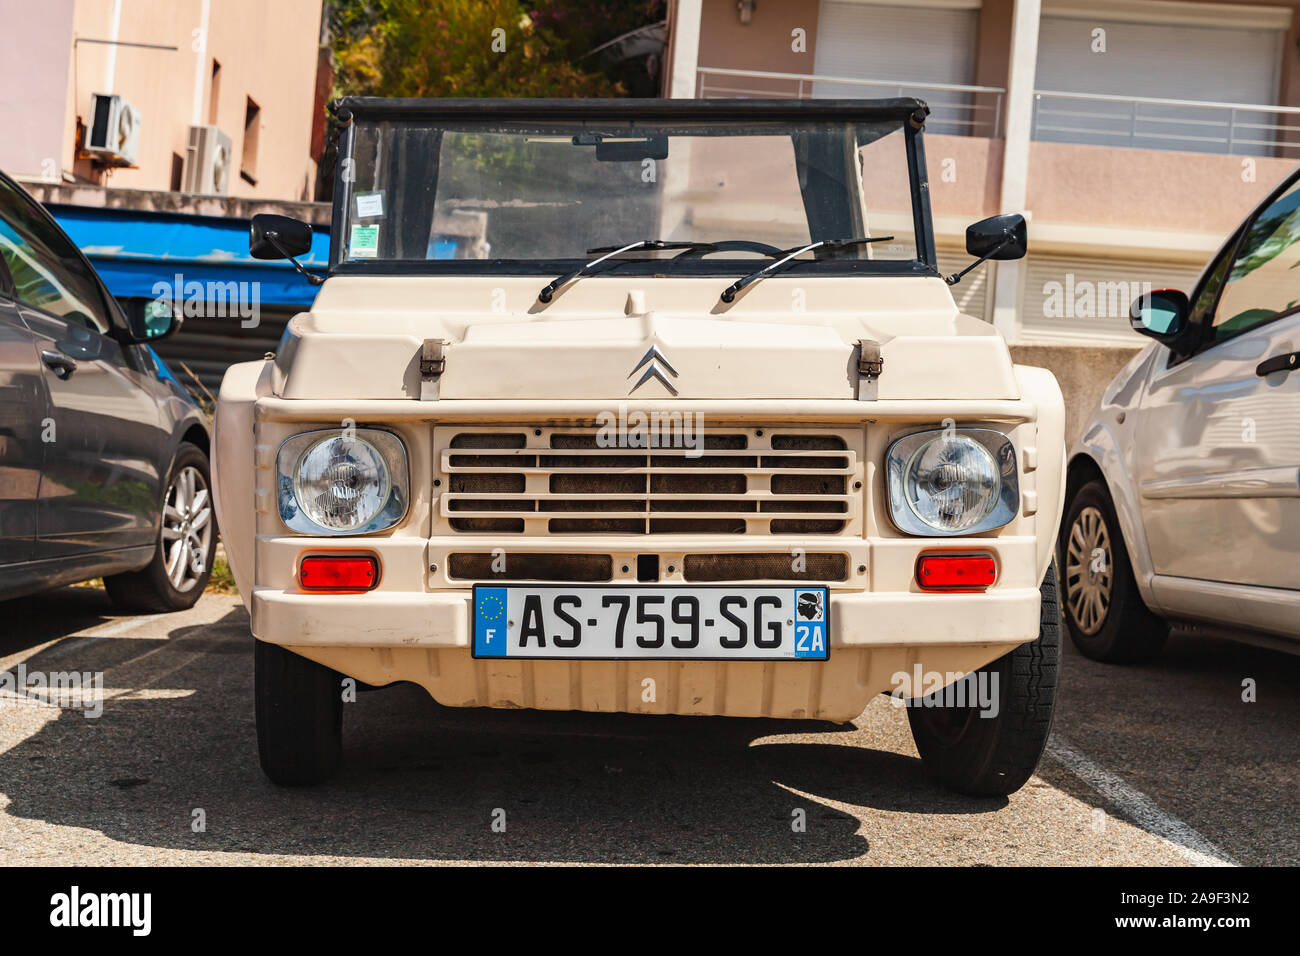 Ajaccio, France - August 25, 2018: Beige Citroen Mehari car stands parked on a street in France, close-up front view Stock Photo